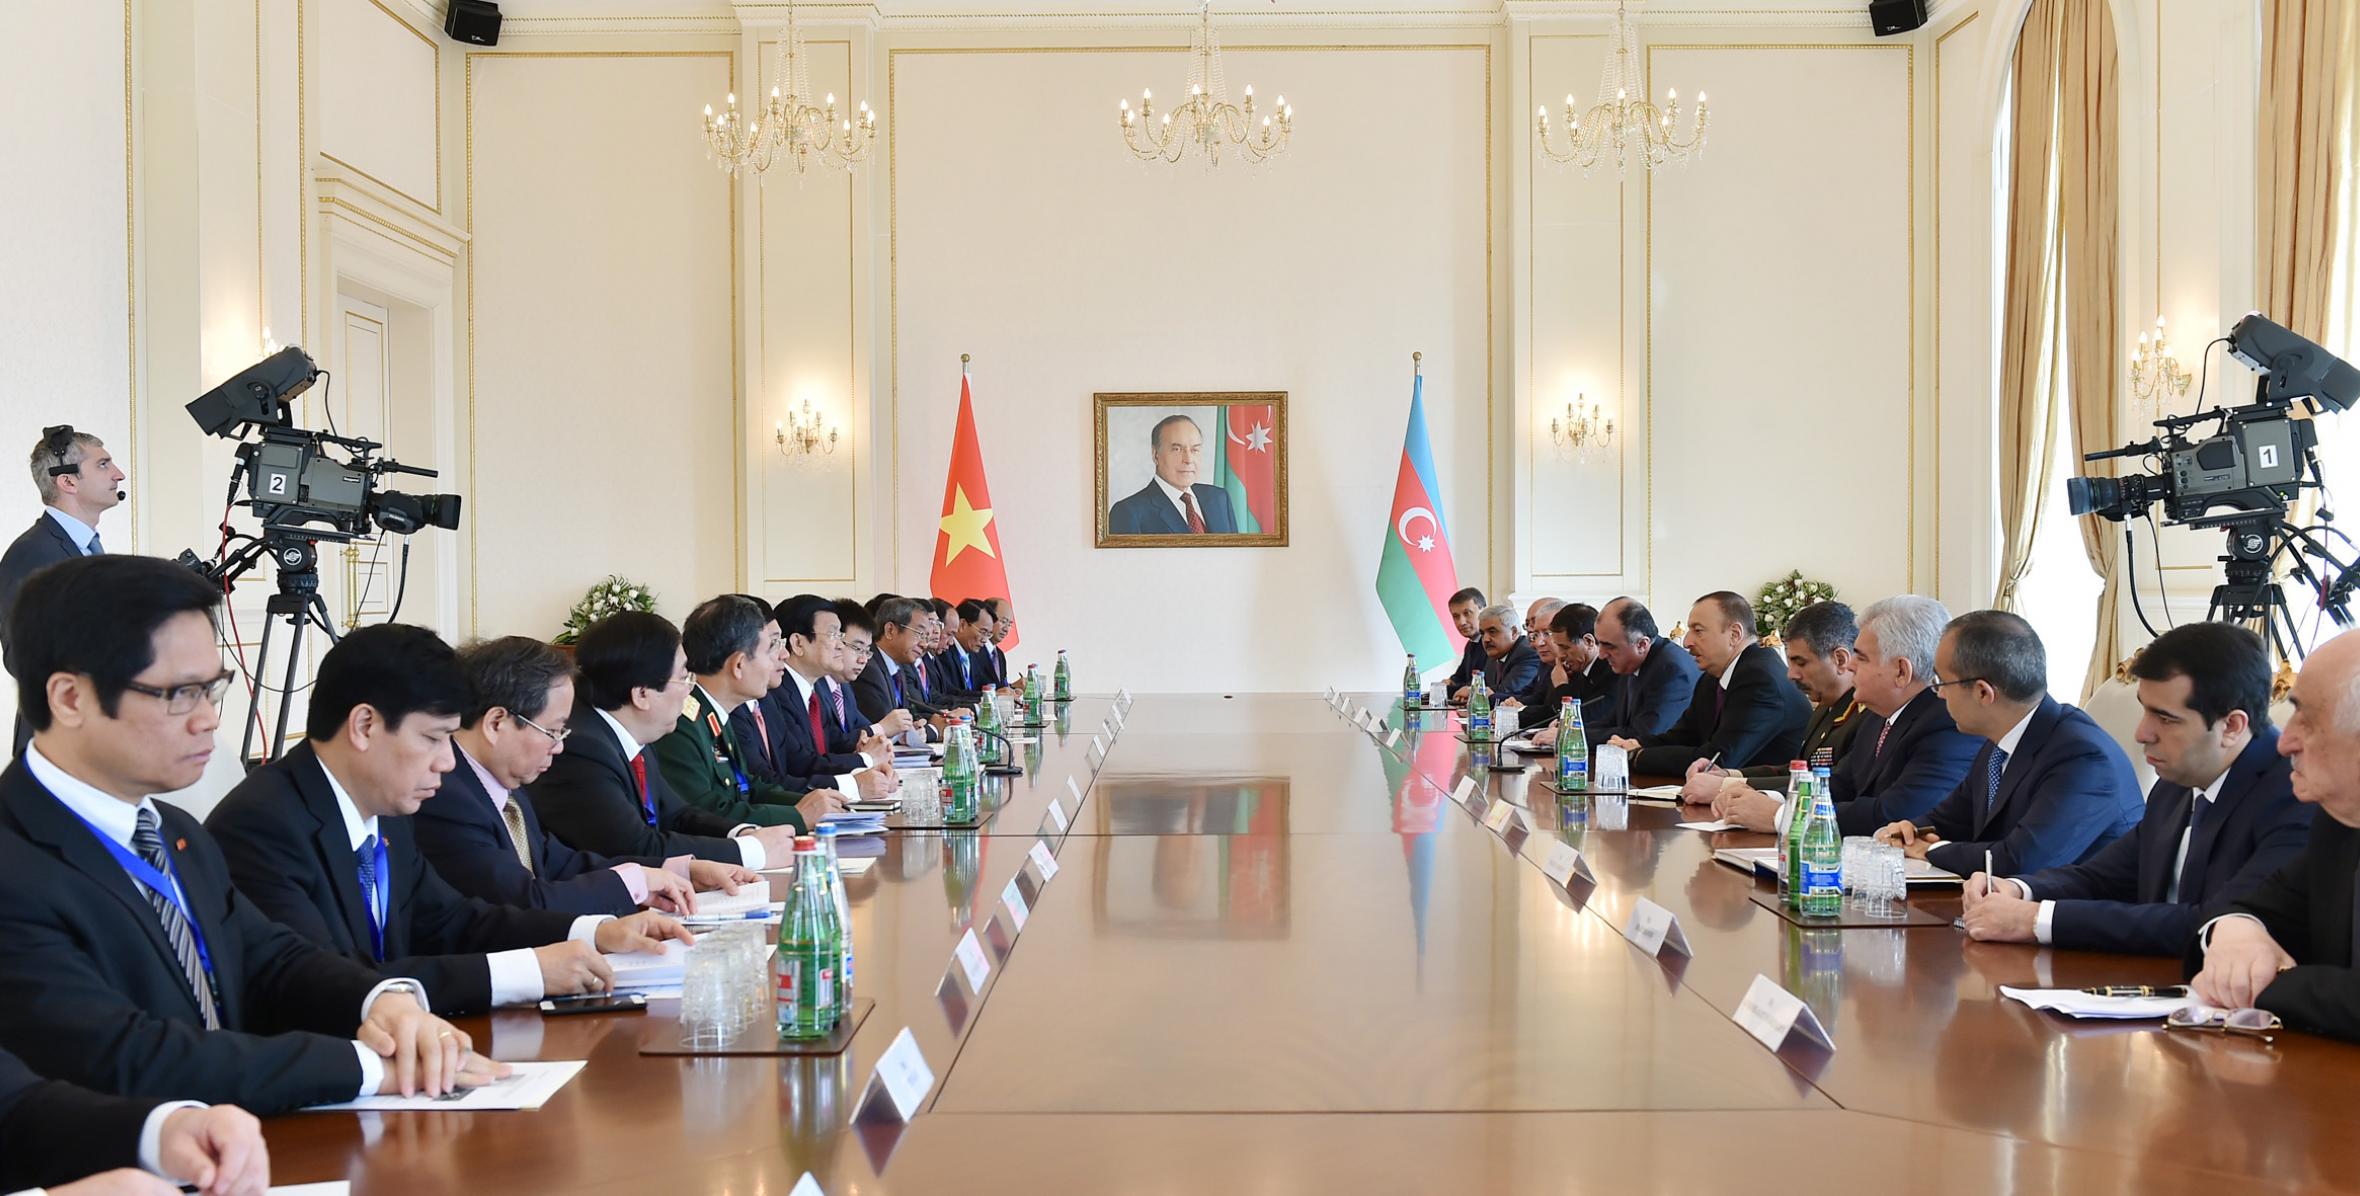 Ilham Aliyev had an expanded meeting with President of Vietnam Truong Tan Sang